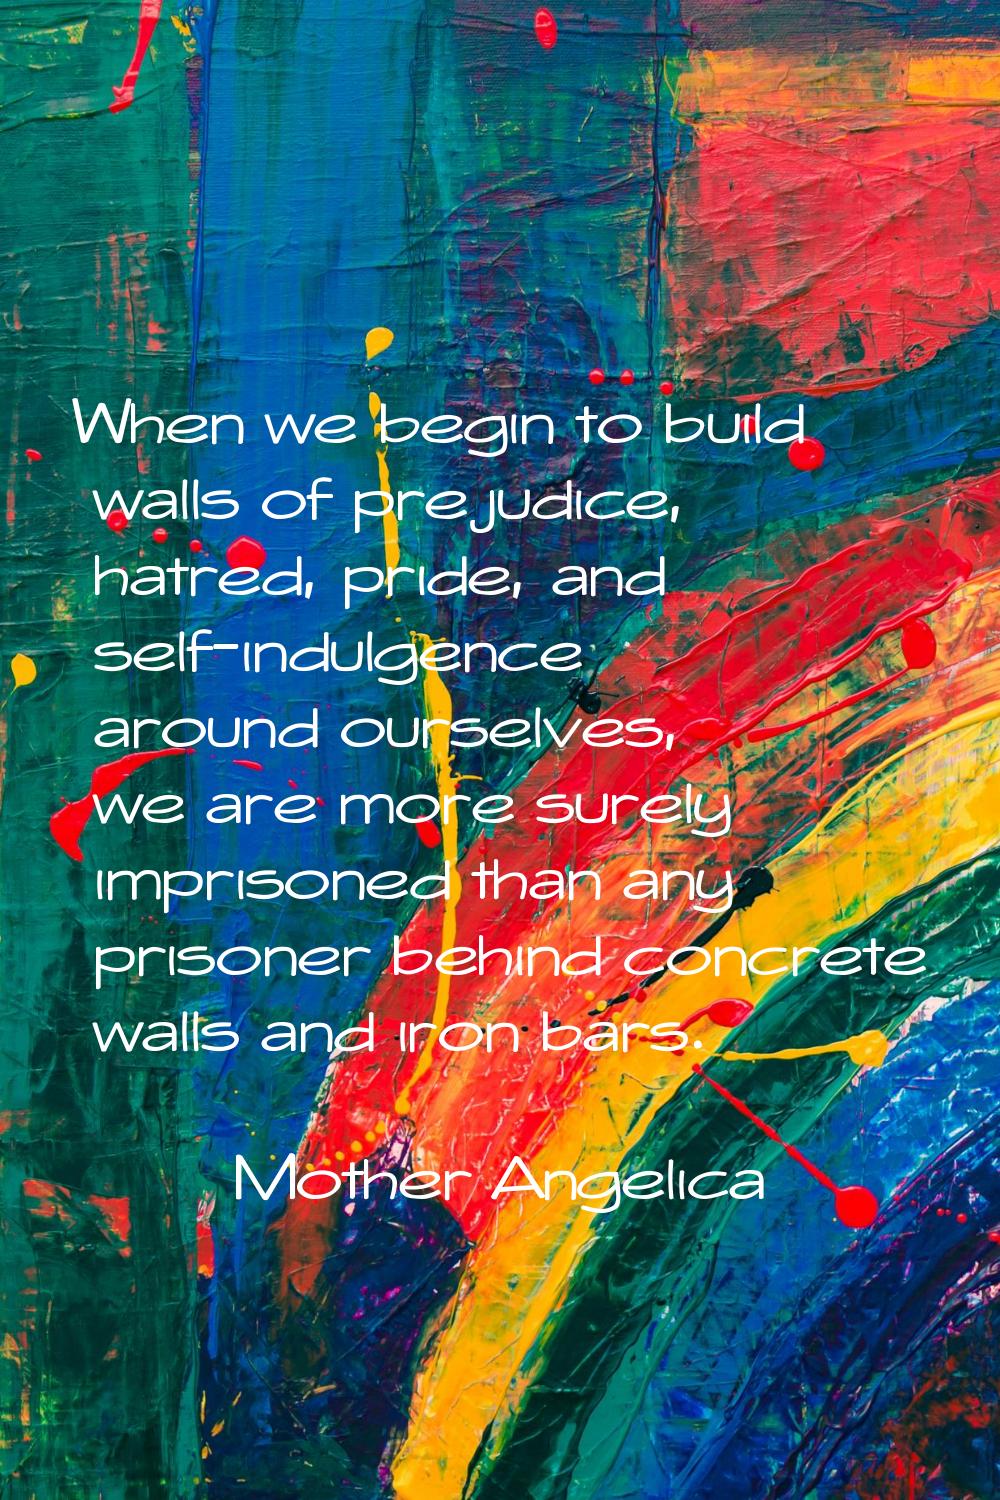 When we begin to build walls of prejudice, hatred, pride, and self-indulgence around ourselves, we 